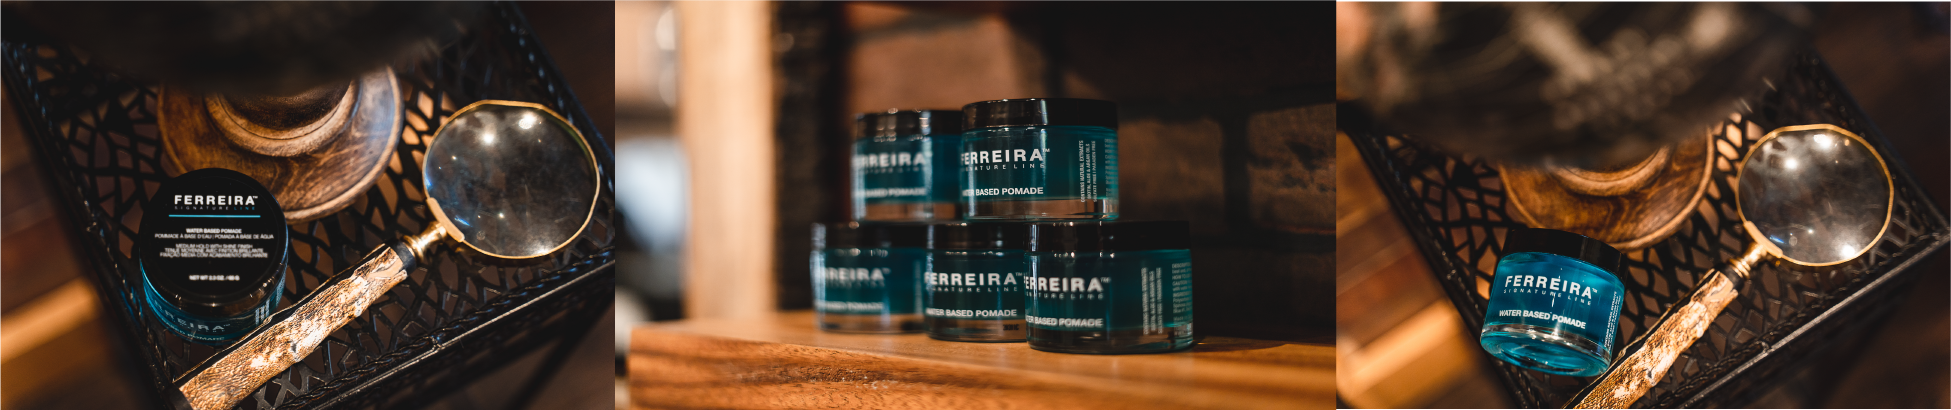 Photos from our shoot in Vancouver, which took place at a barbershop that now sells Ferreira Signature Line water-based pomade and texture paste.